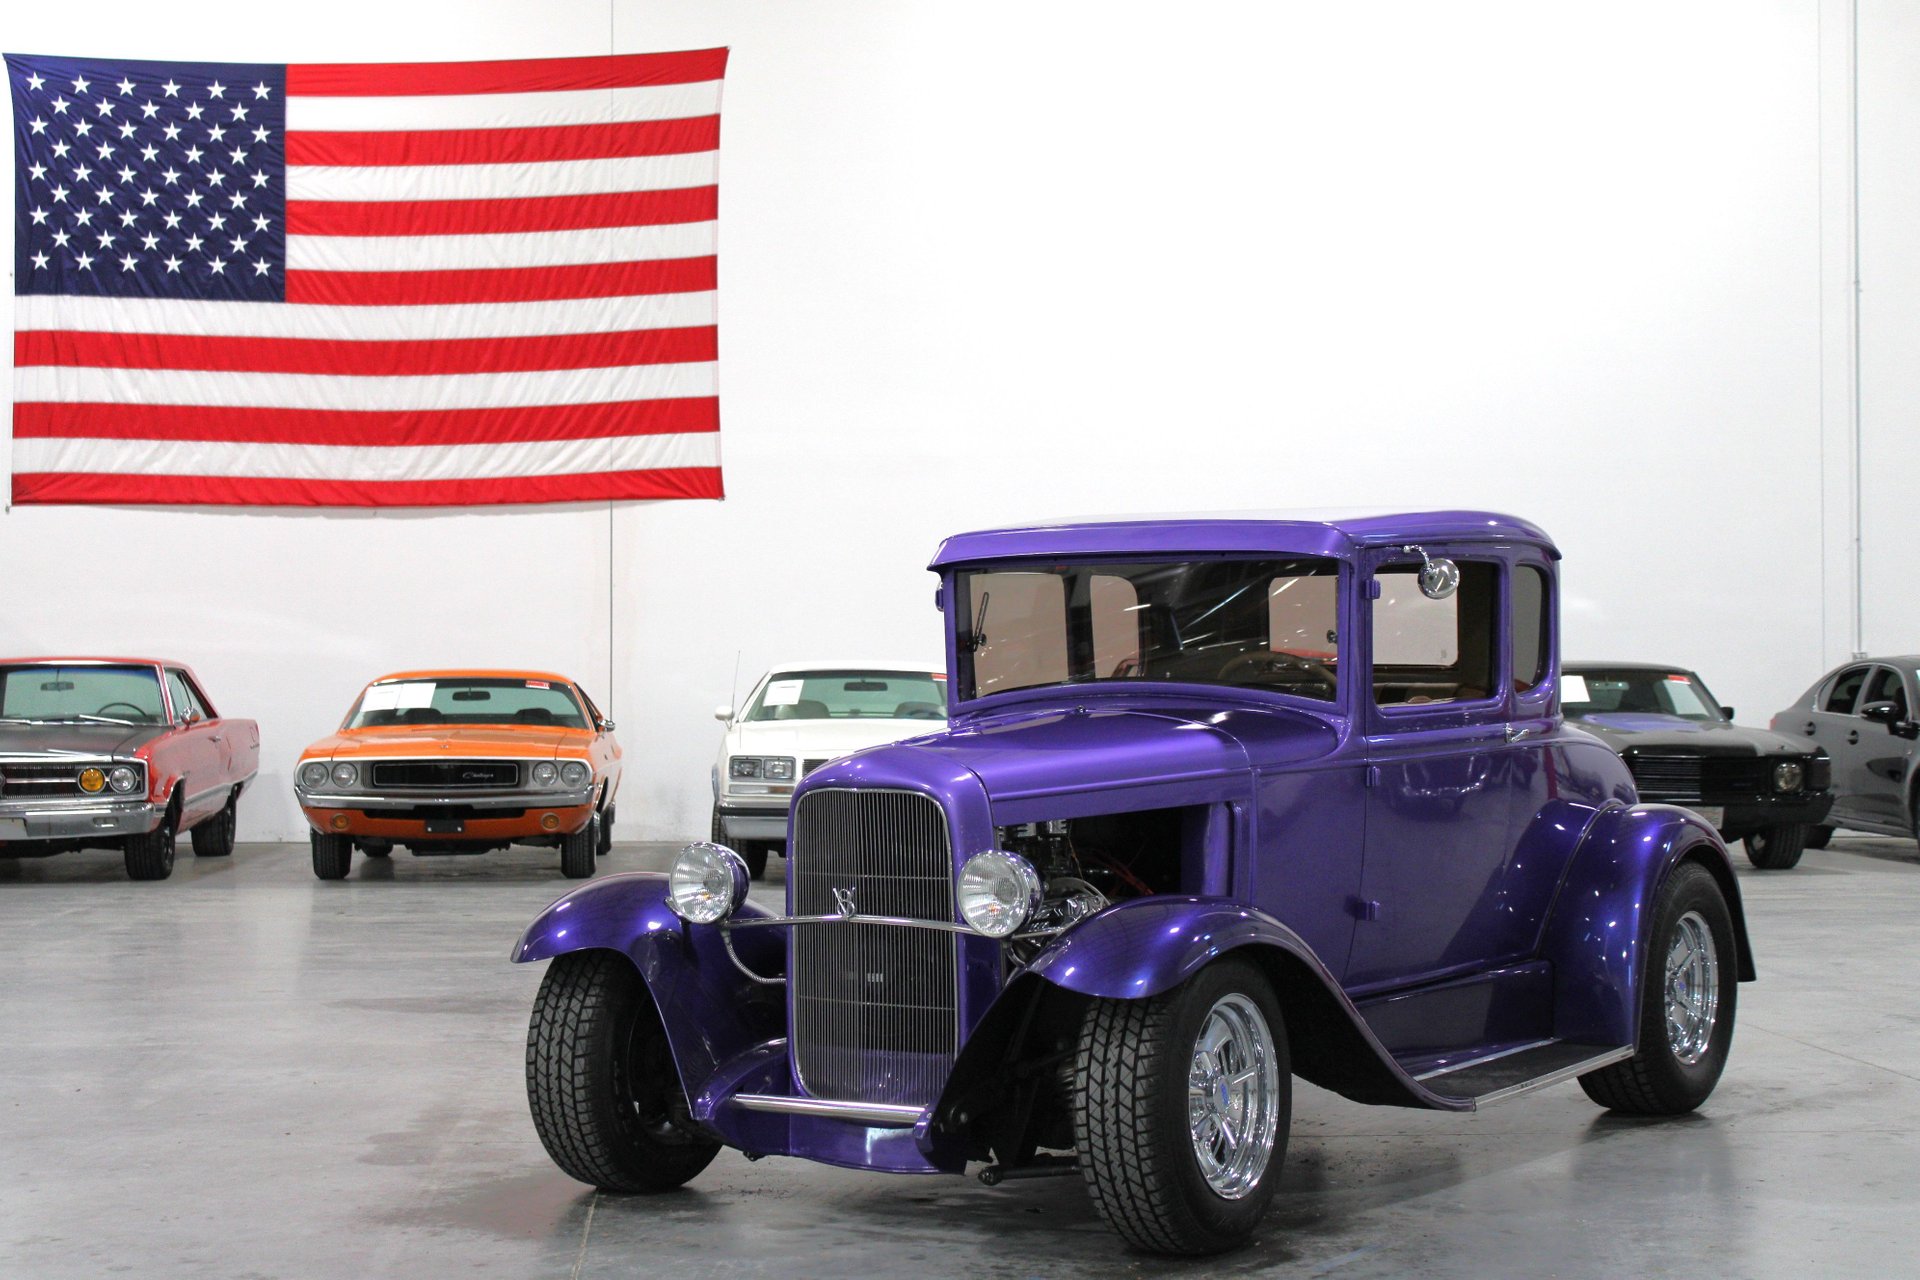 1931 ford model a coupe